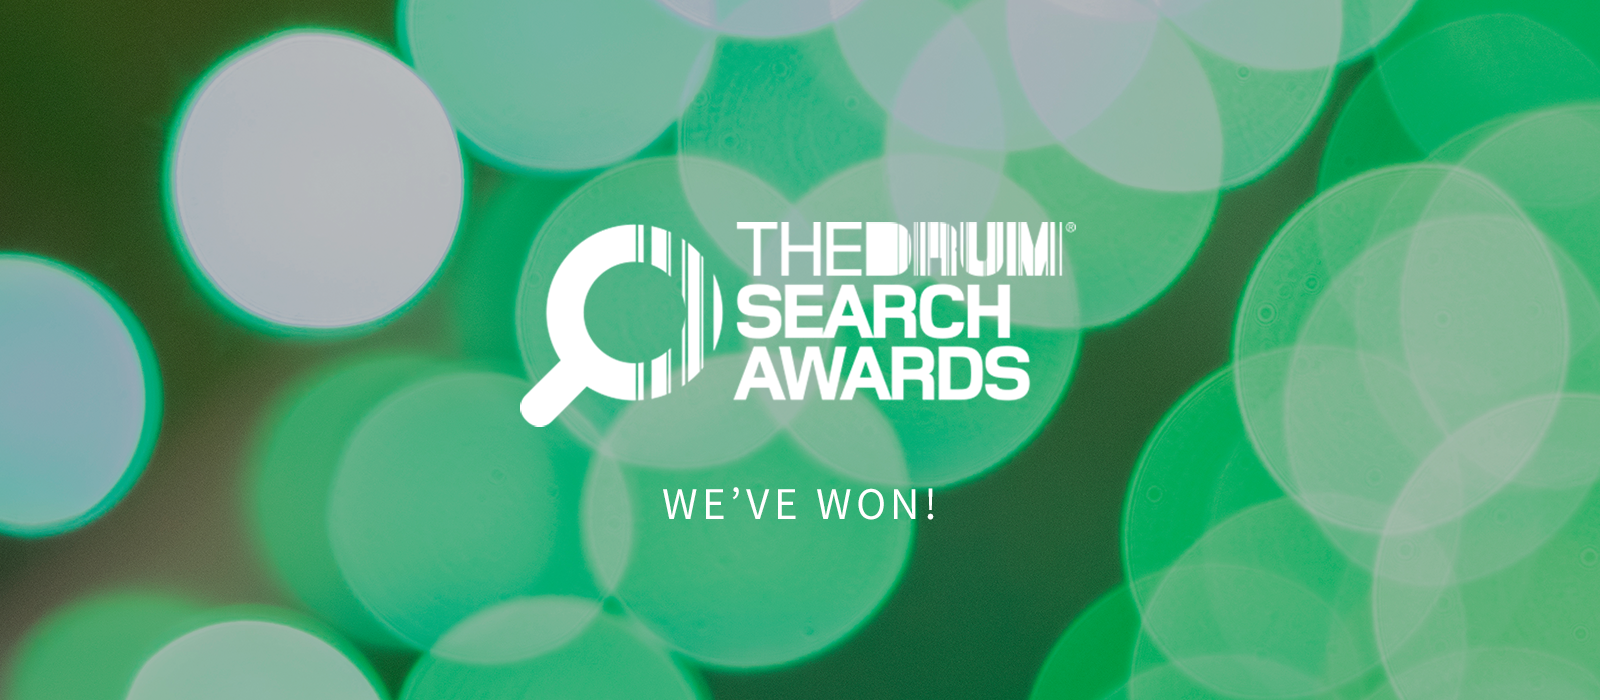 DRUM-SEARCH-AWARDS-win-2018